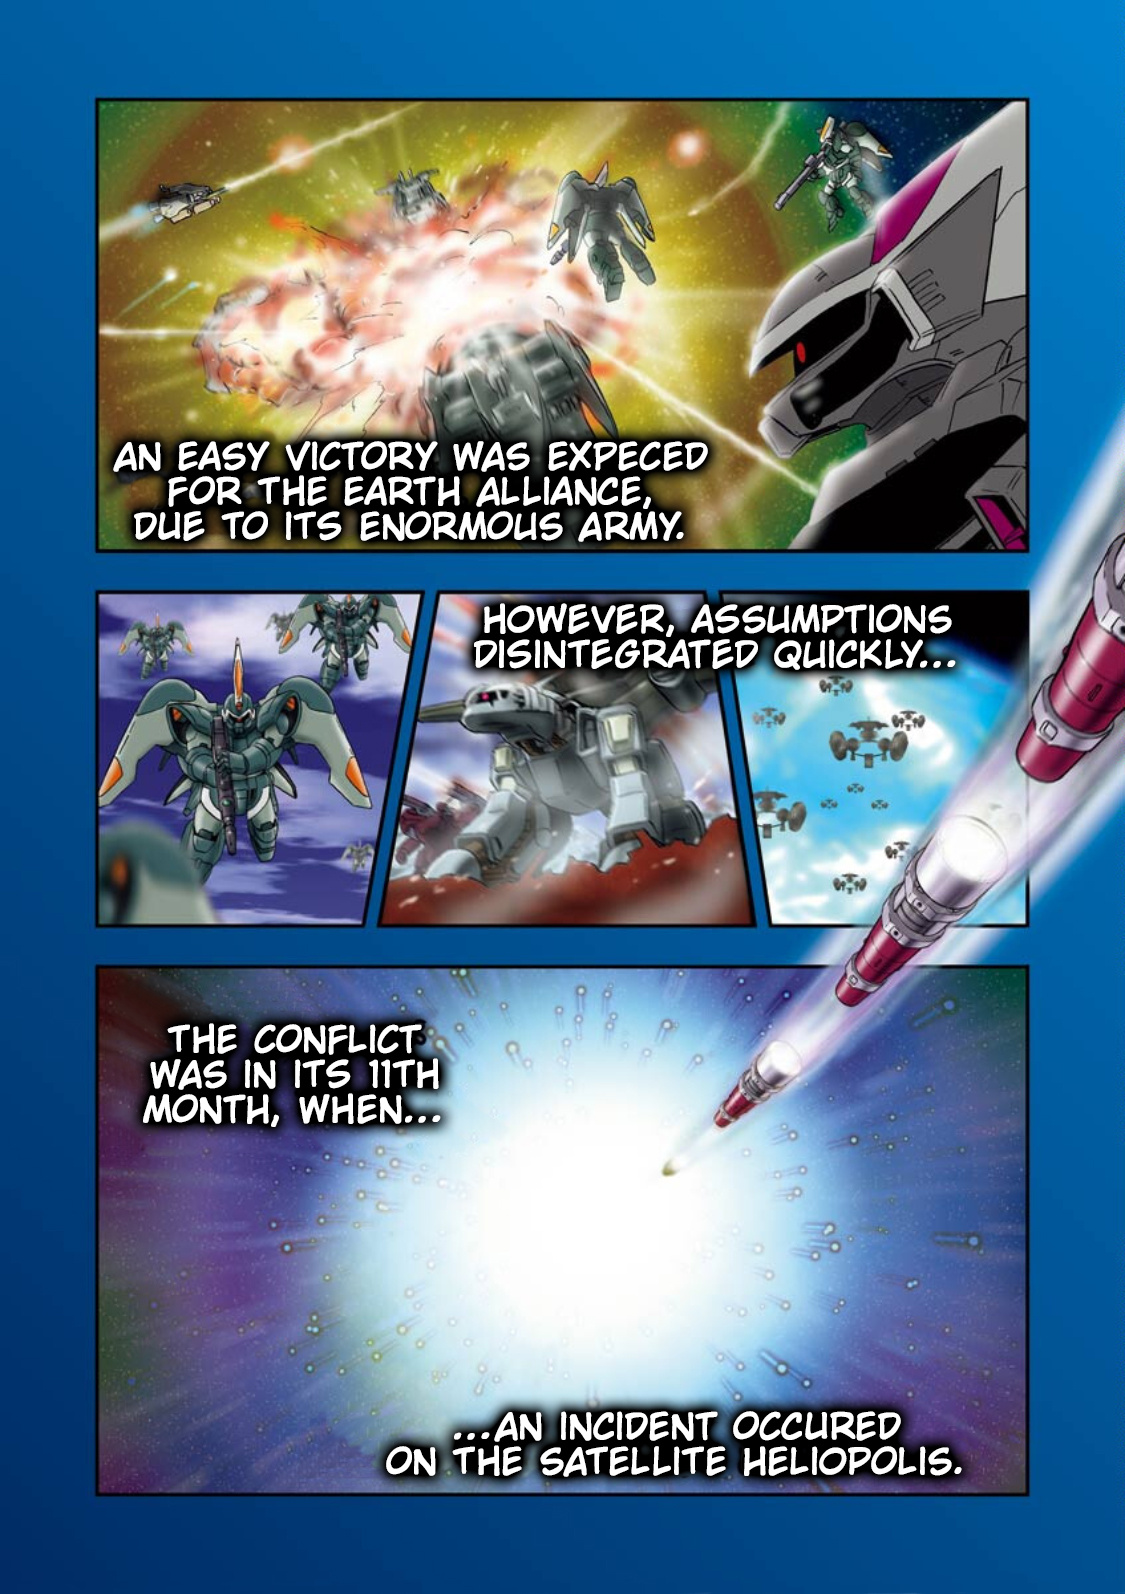 Mobile Suit Gundam Seed Astray Re:master Edition Vol.1 Chapter 0: Prologue - Picture 2